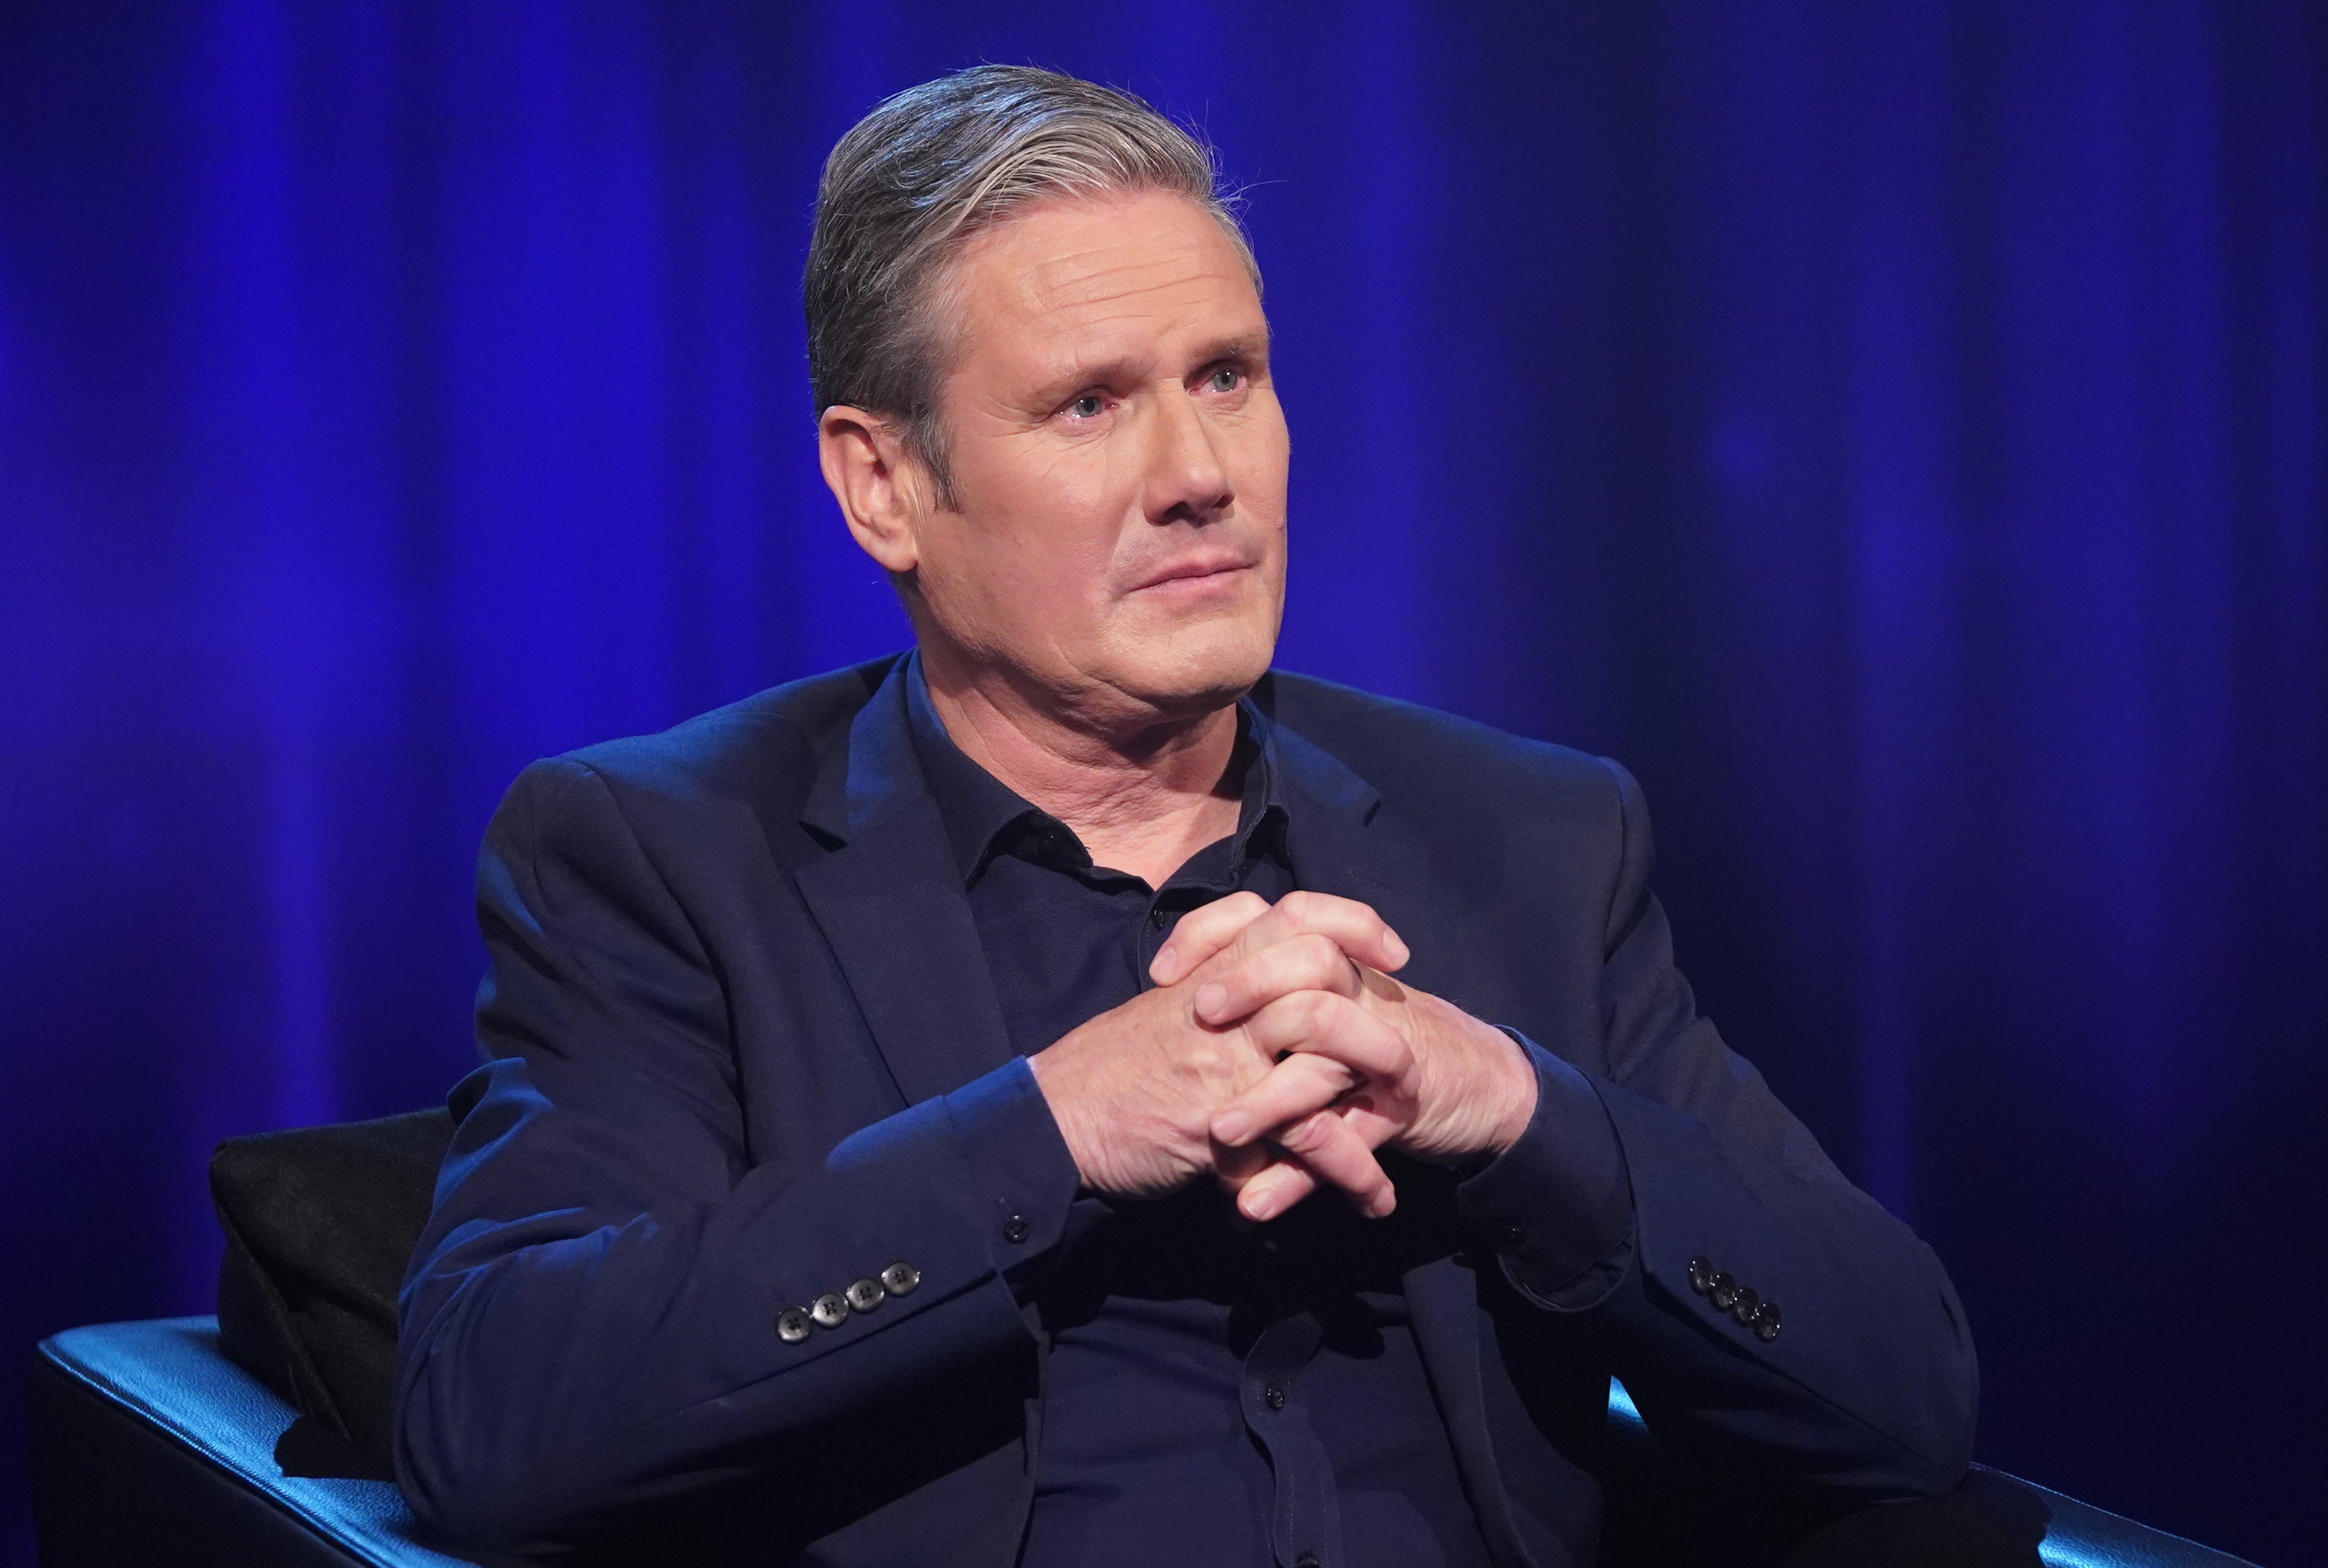 Keir Starmer came across in a natural way during his interview with Piers Morgan